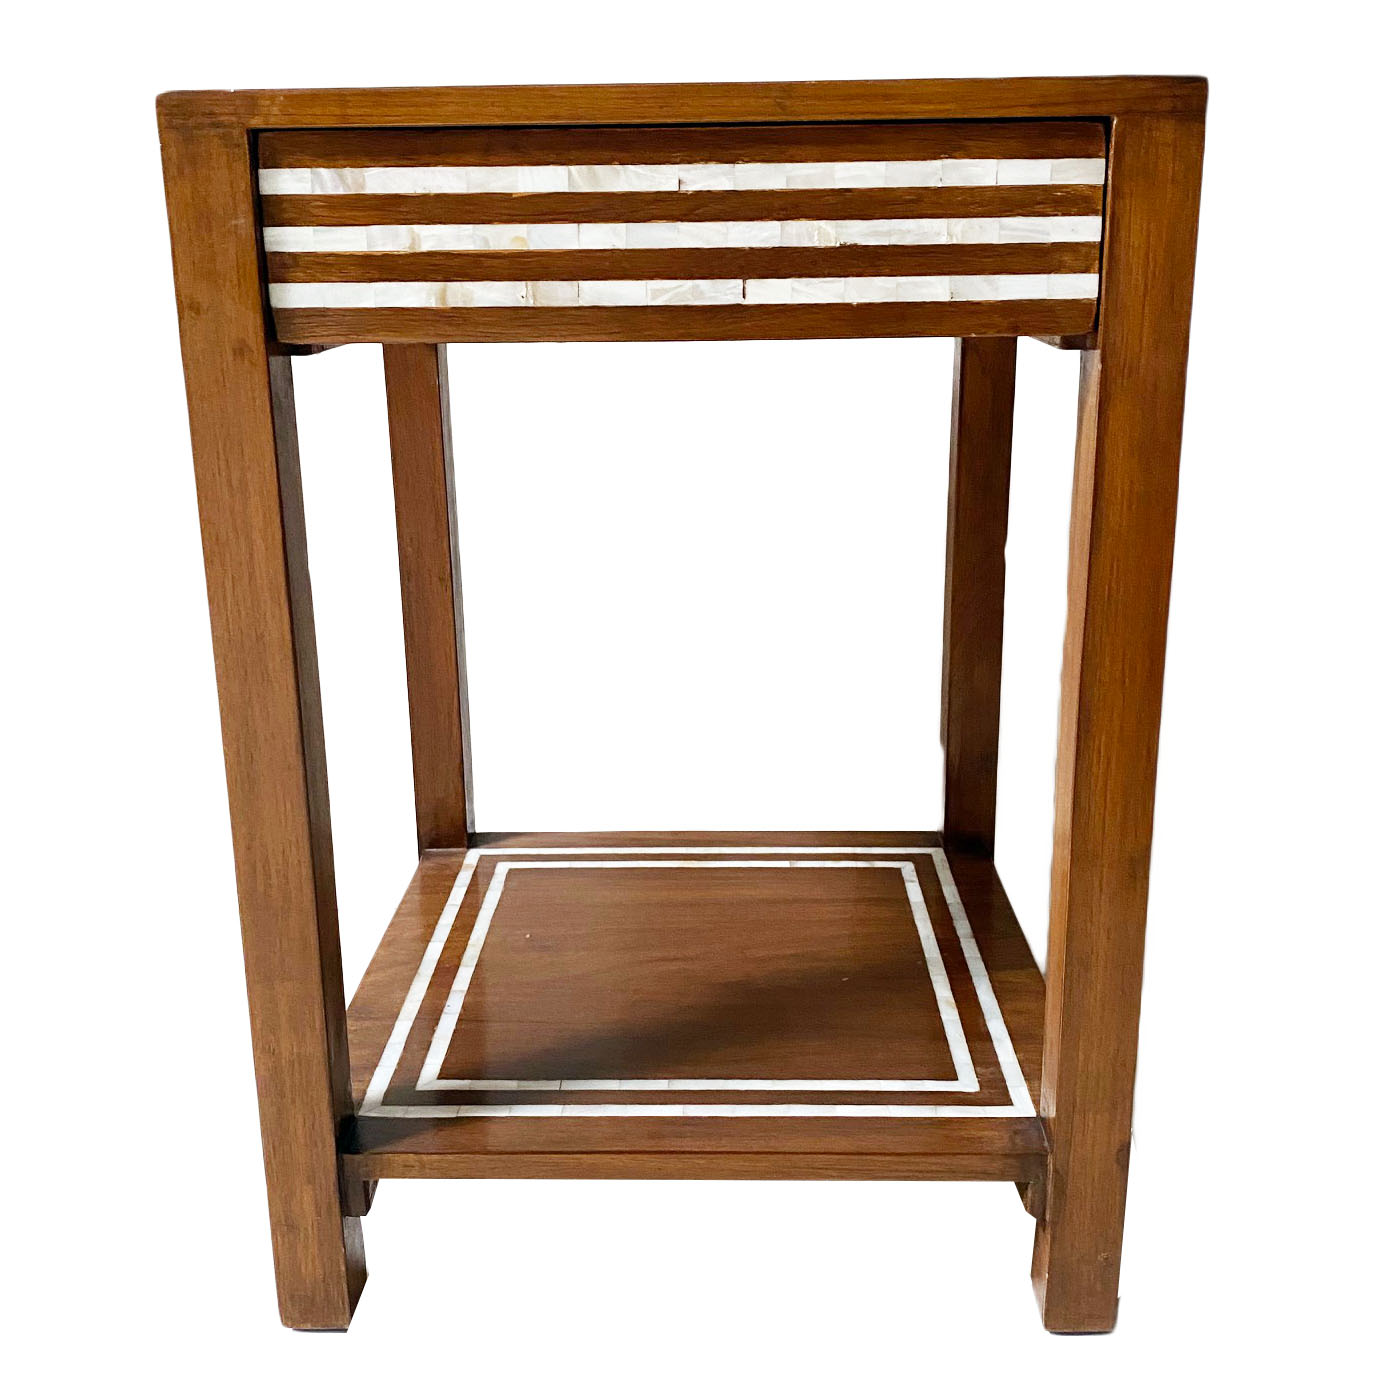 Striped Inlay End Table, Light Tone